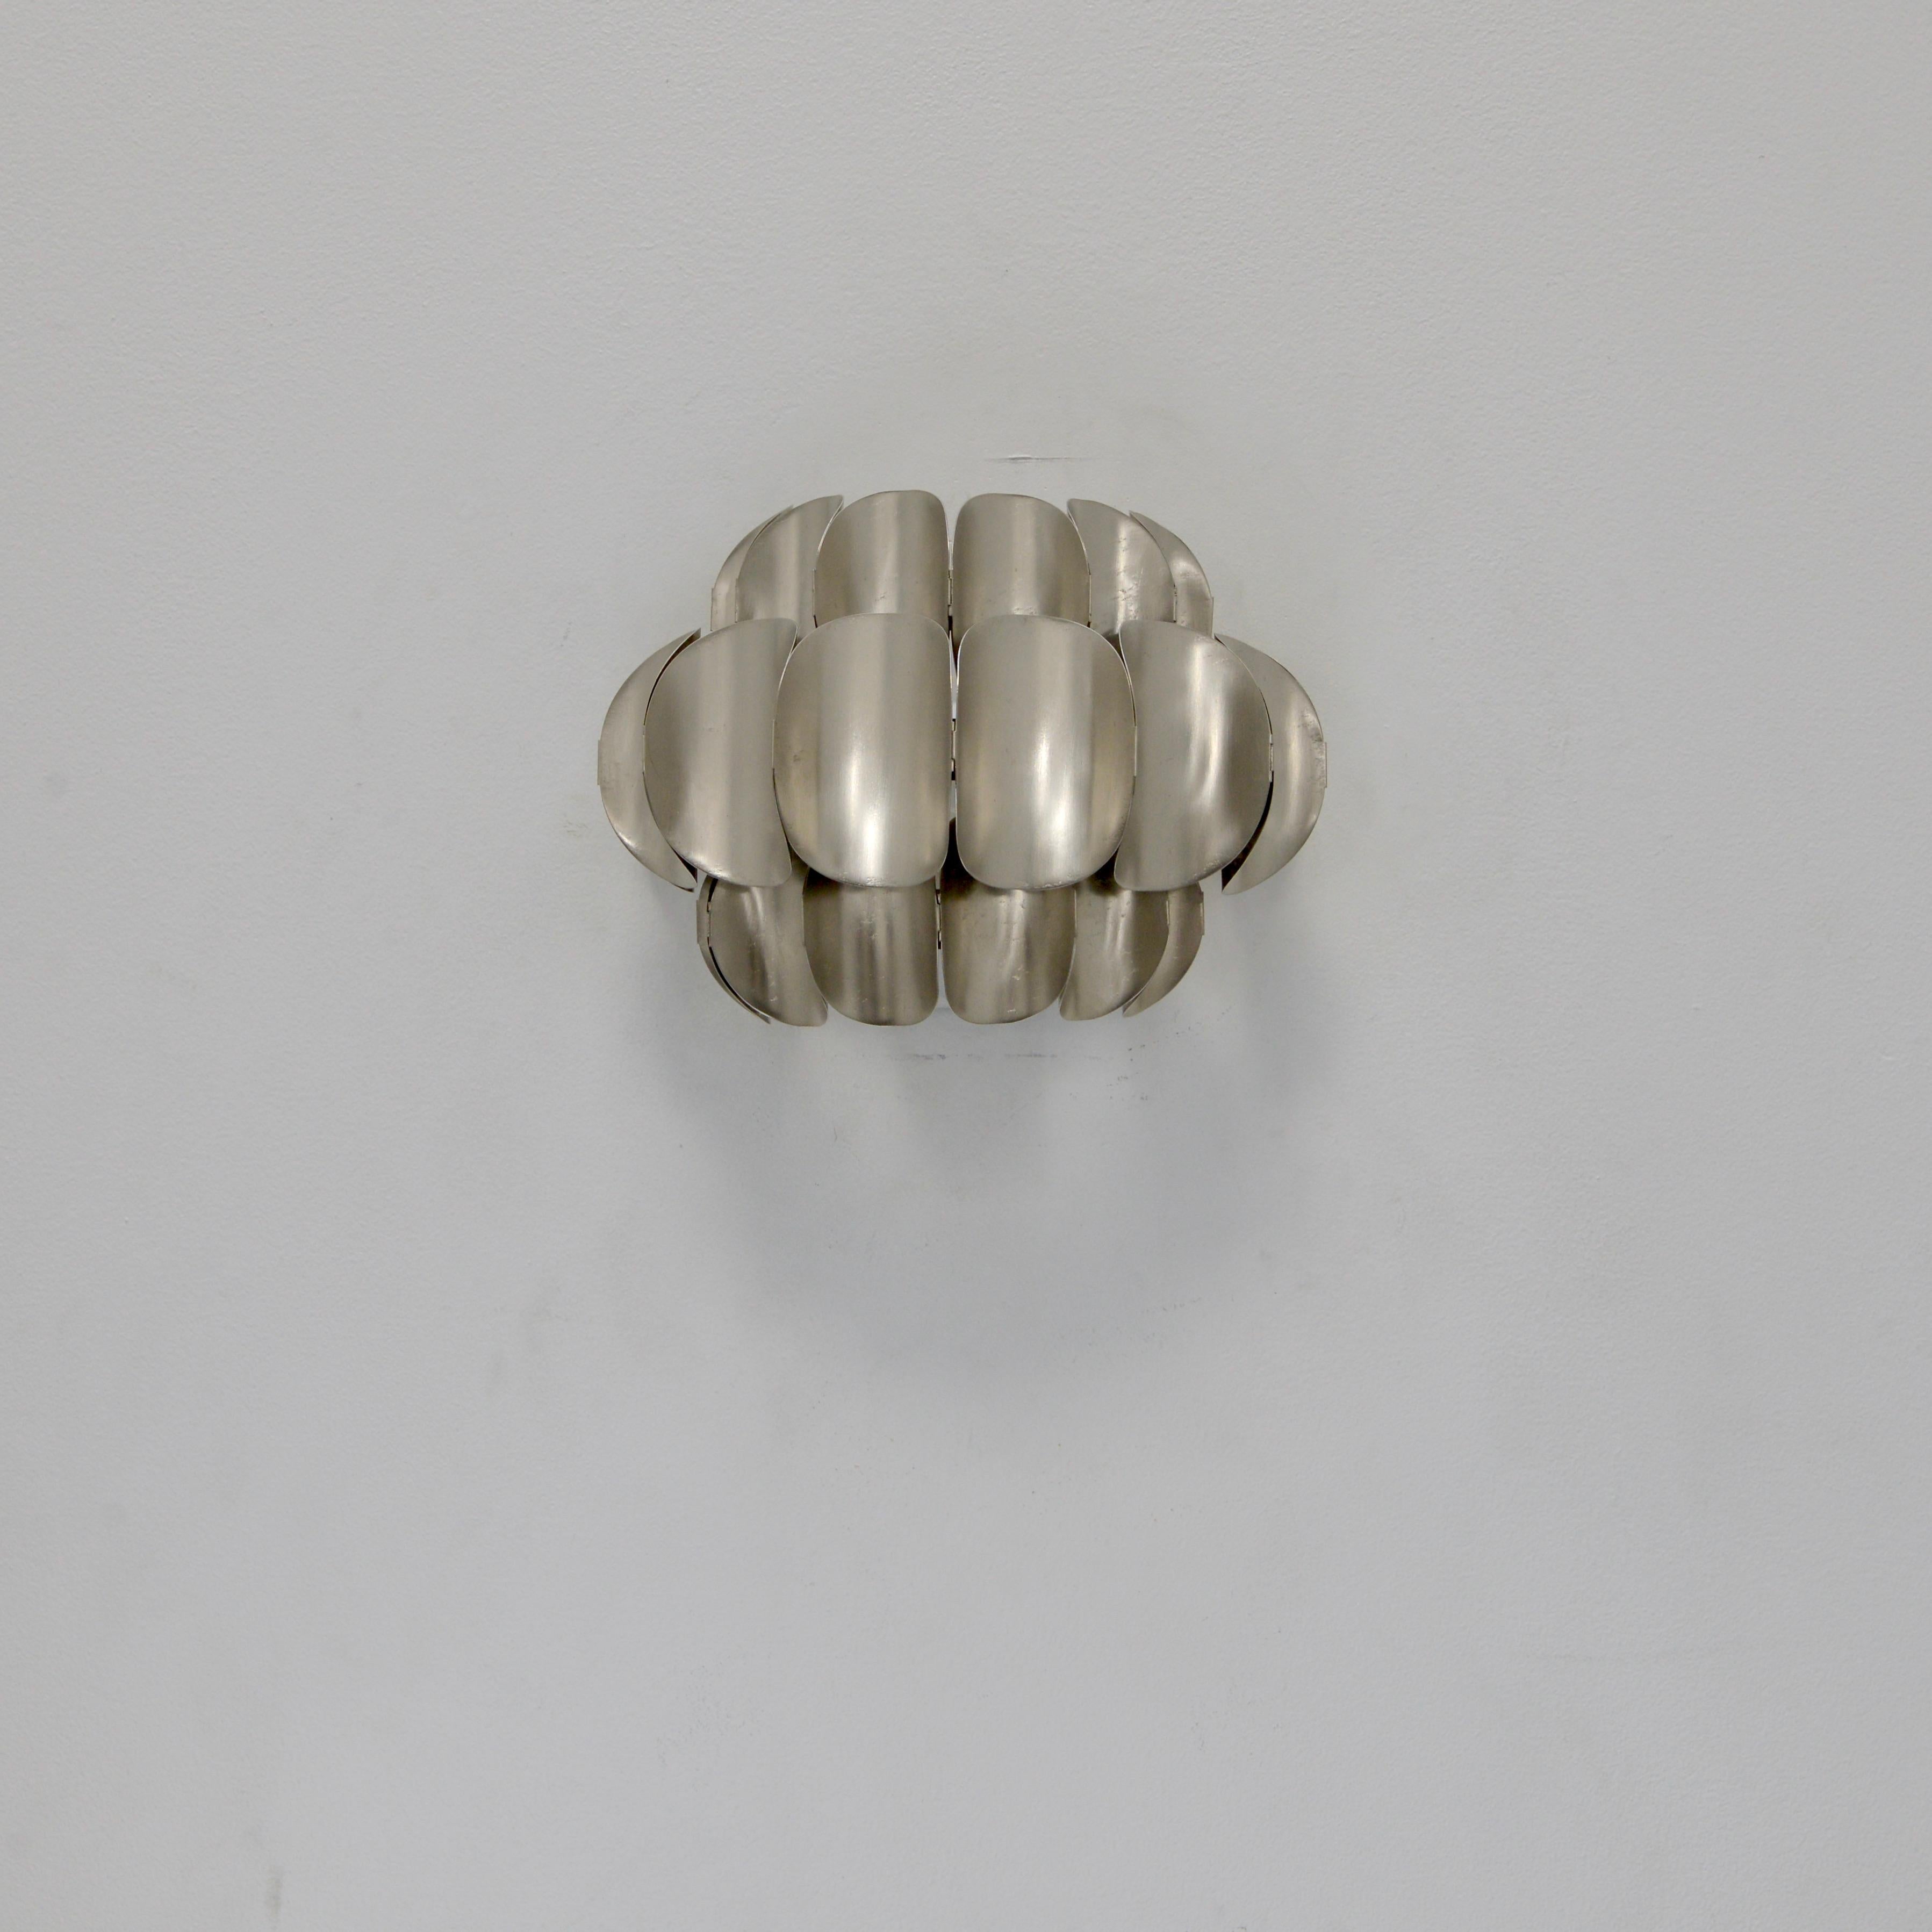 Beautiful nickel-plated steel sconces by Hans-Agne Jakobsson from 1950s Sweden. Partially restored, with original nickel-plated steel finish. Rewired for the US with a single E26 medium based socket per sconce. Lightbulbs included with